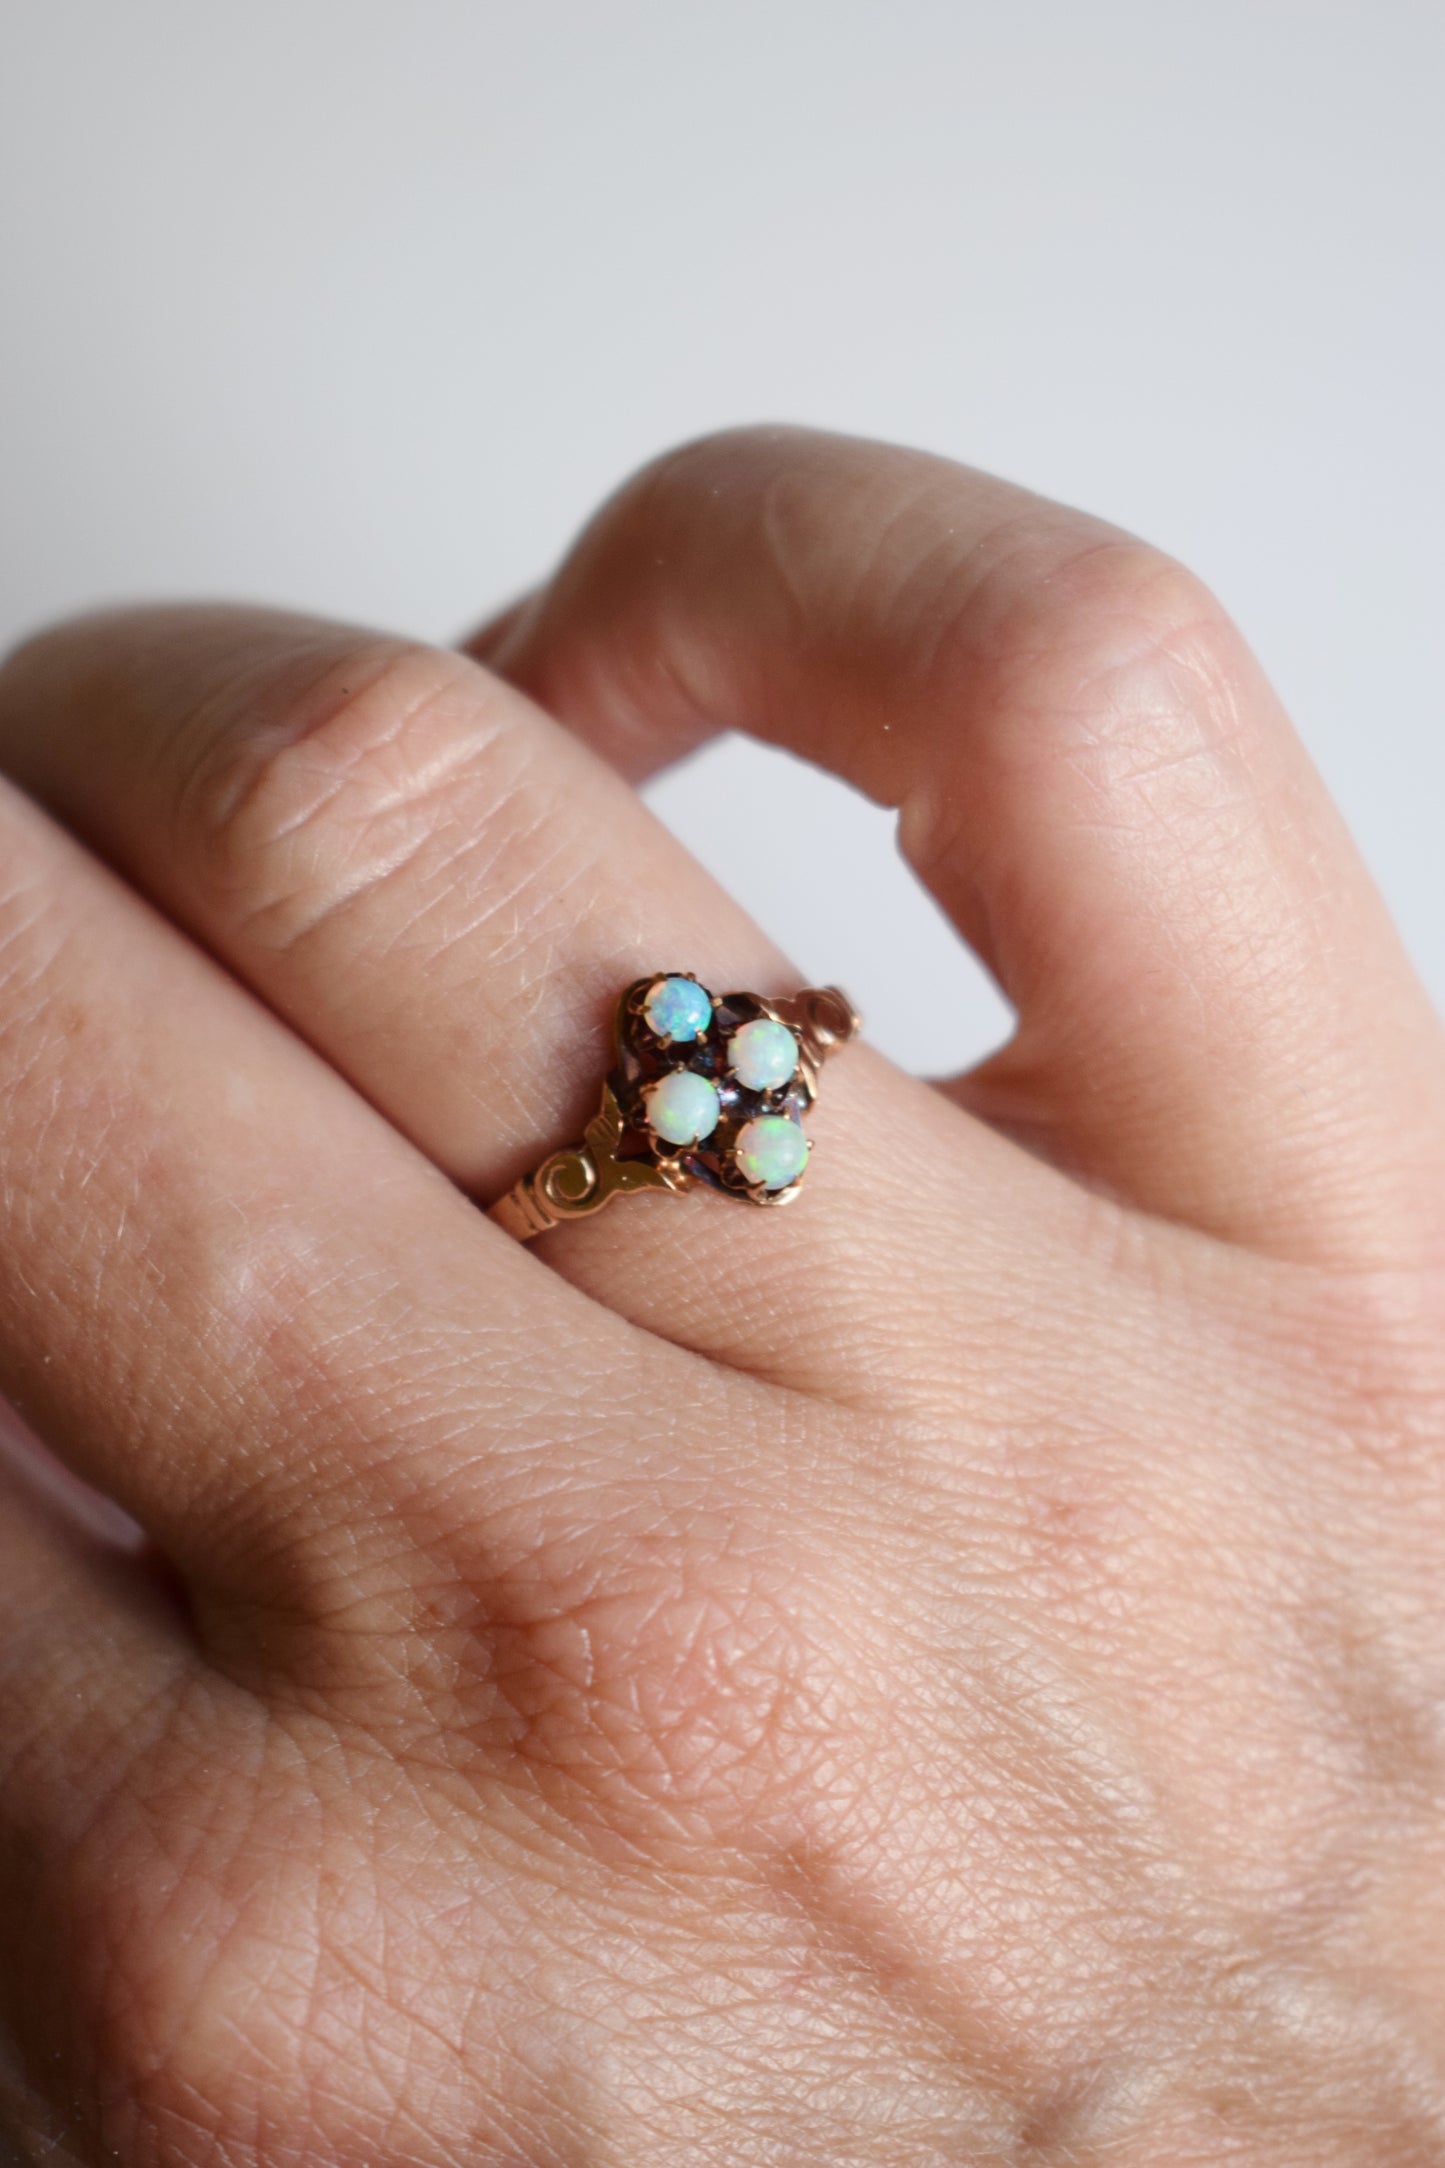 Vintage 10kt Gold and Opal Victorian Revival Ring | size 6 3/4